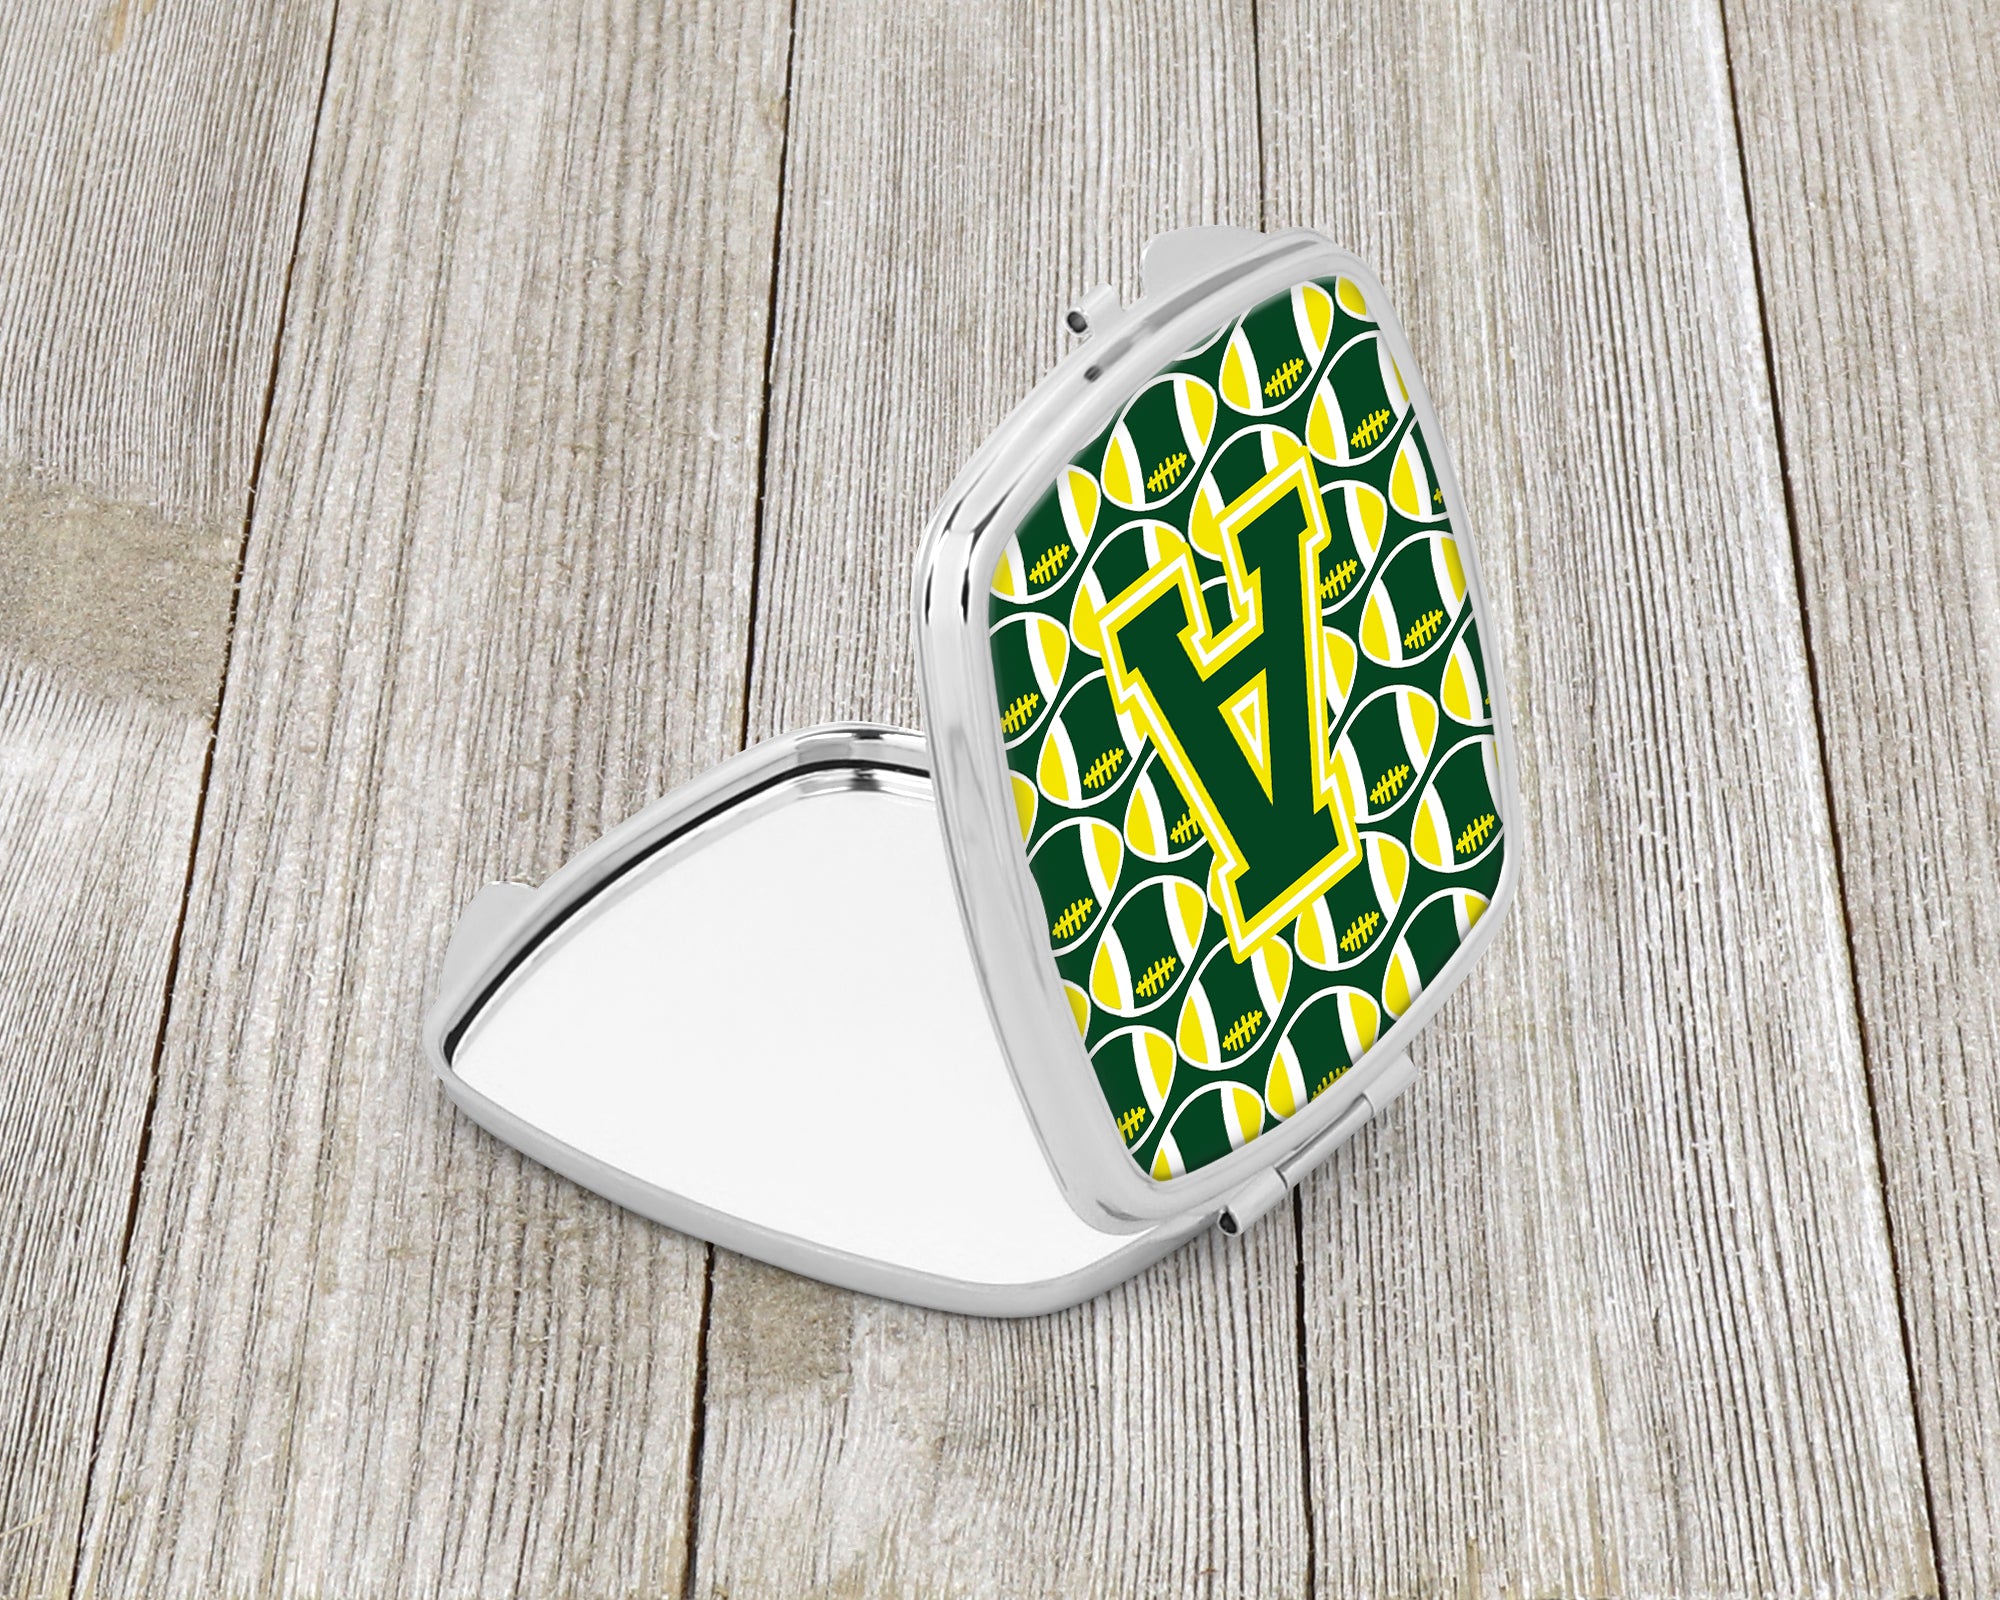 Letter A Football Green and Yellow Compact Mirror CJ1075-ASCM  the-store.com.